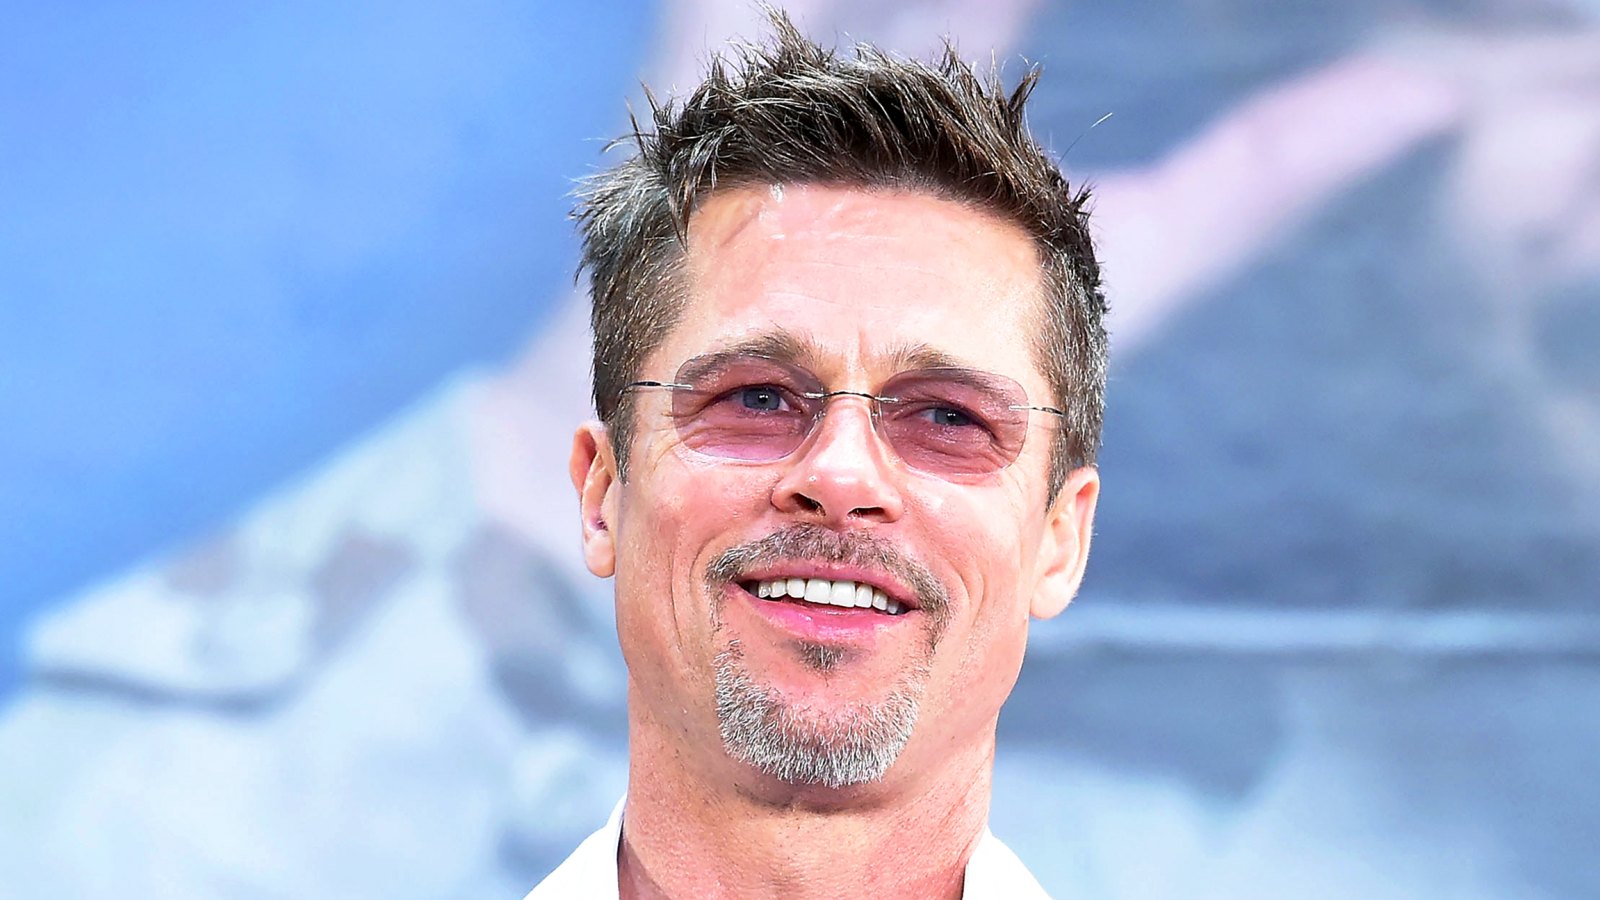 Brad Pitt attends the 2017 premiere for 'War Machine' at Roppongi Hills in Tokyo, Japan.